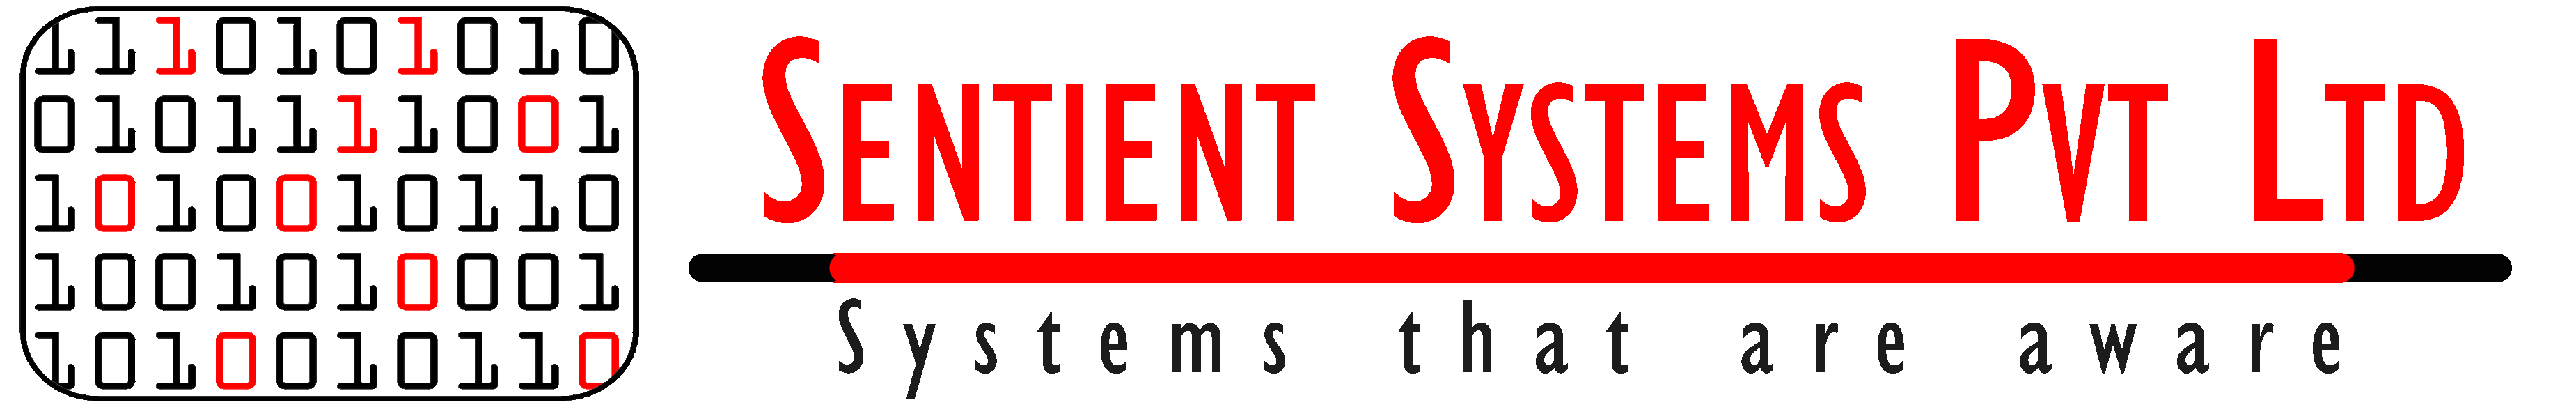 Sentient Systems Private Limited